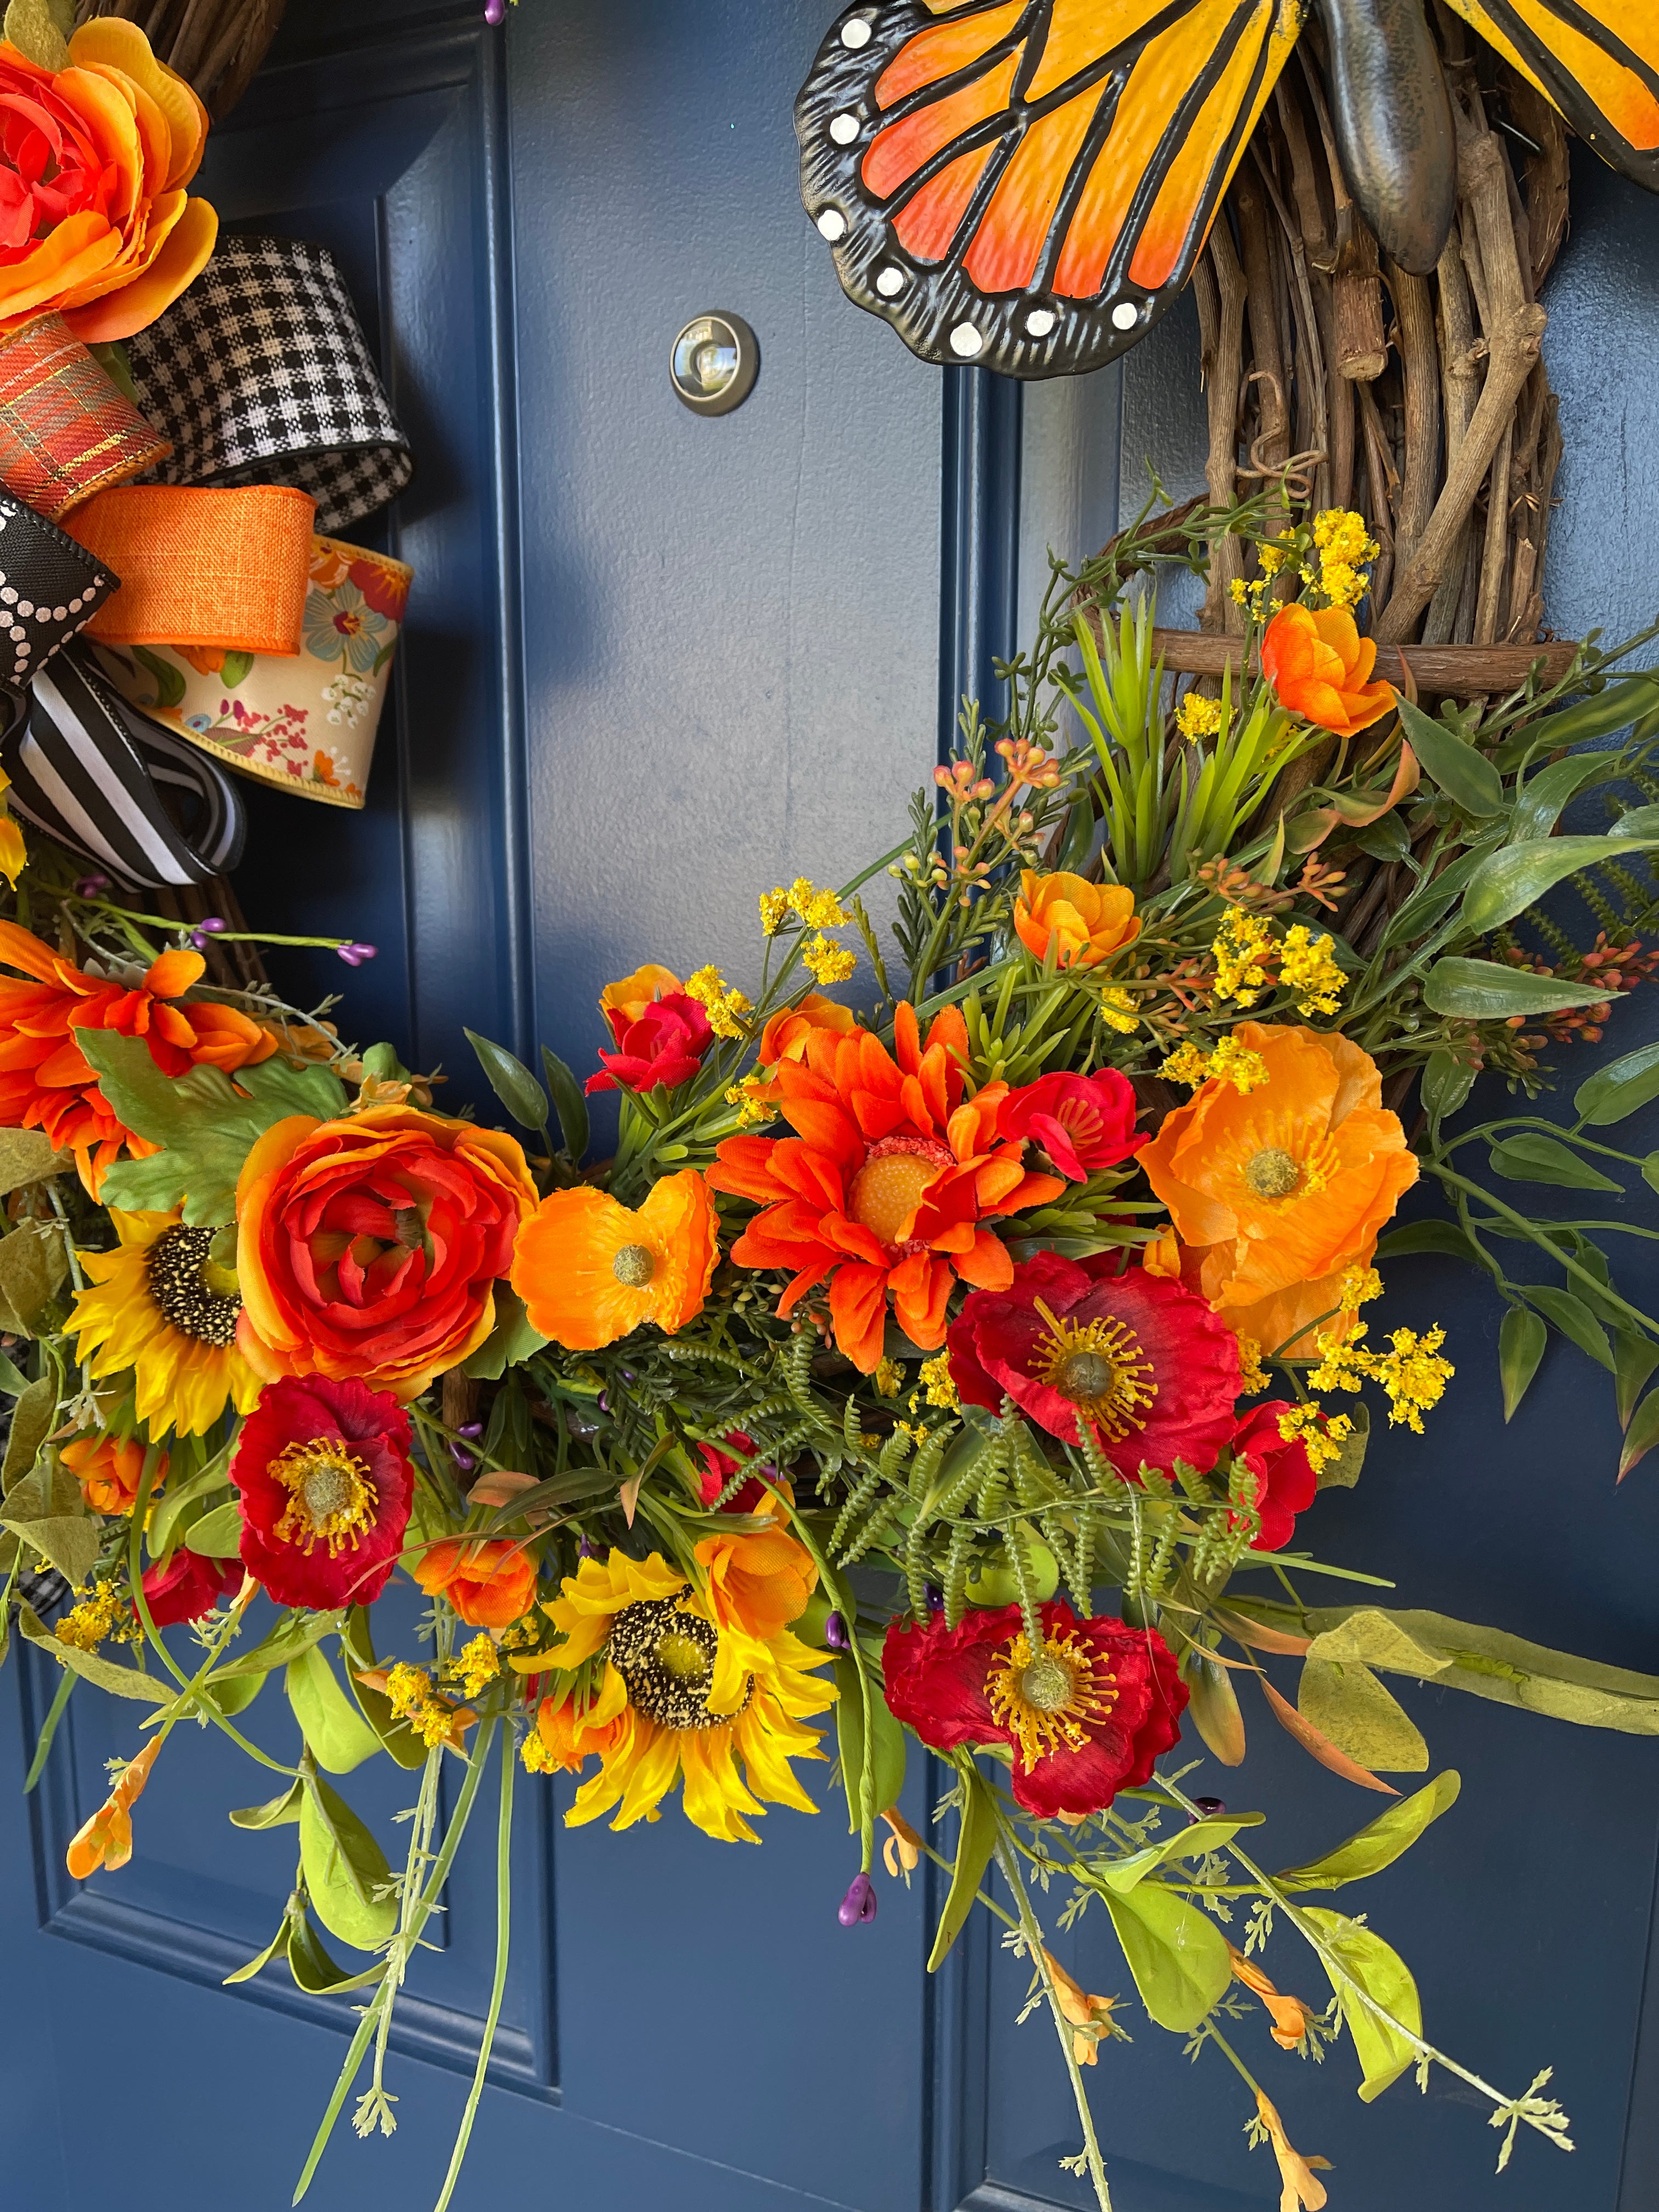 Orange, Yellow and Red Poppies, Sunflowers, Ranunculus and Meadow Flowers on a Grapevine Wreath